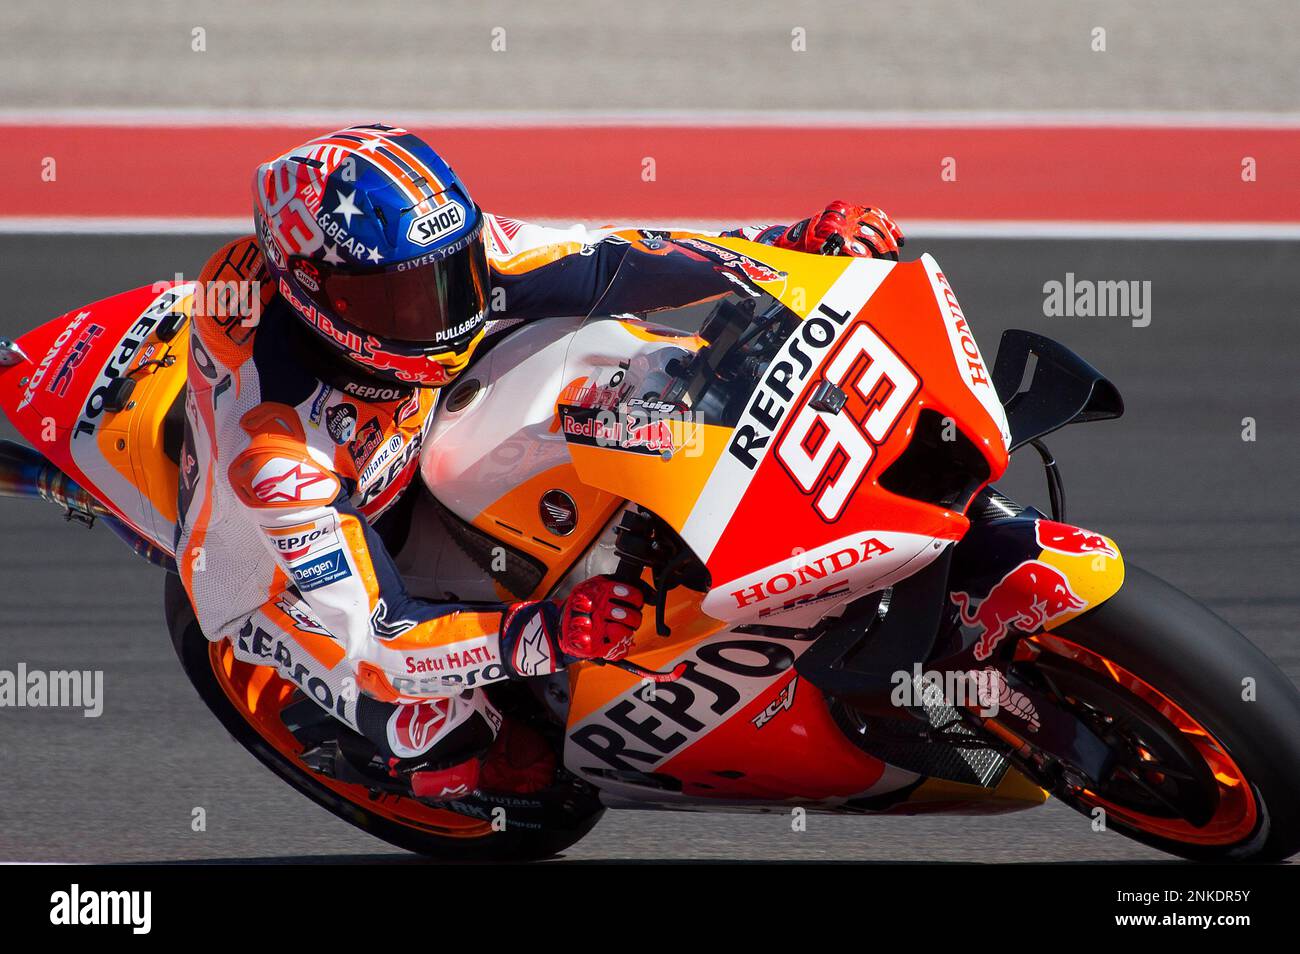 April 08, 2022 Marc Marquez #93 with Repsol Honda Team in action Free Practice 1 at the MotoGP Red Bull Grand Prix of the Americas, Circuit of The Americas, Austin,Texas